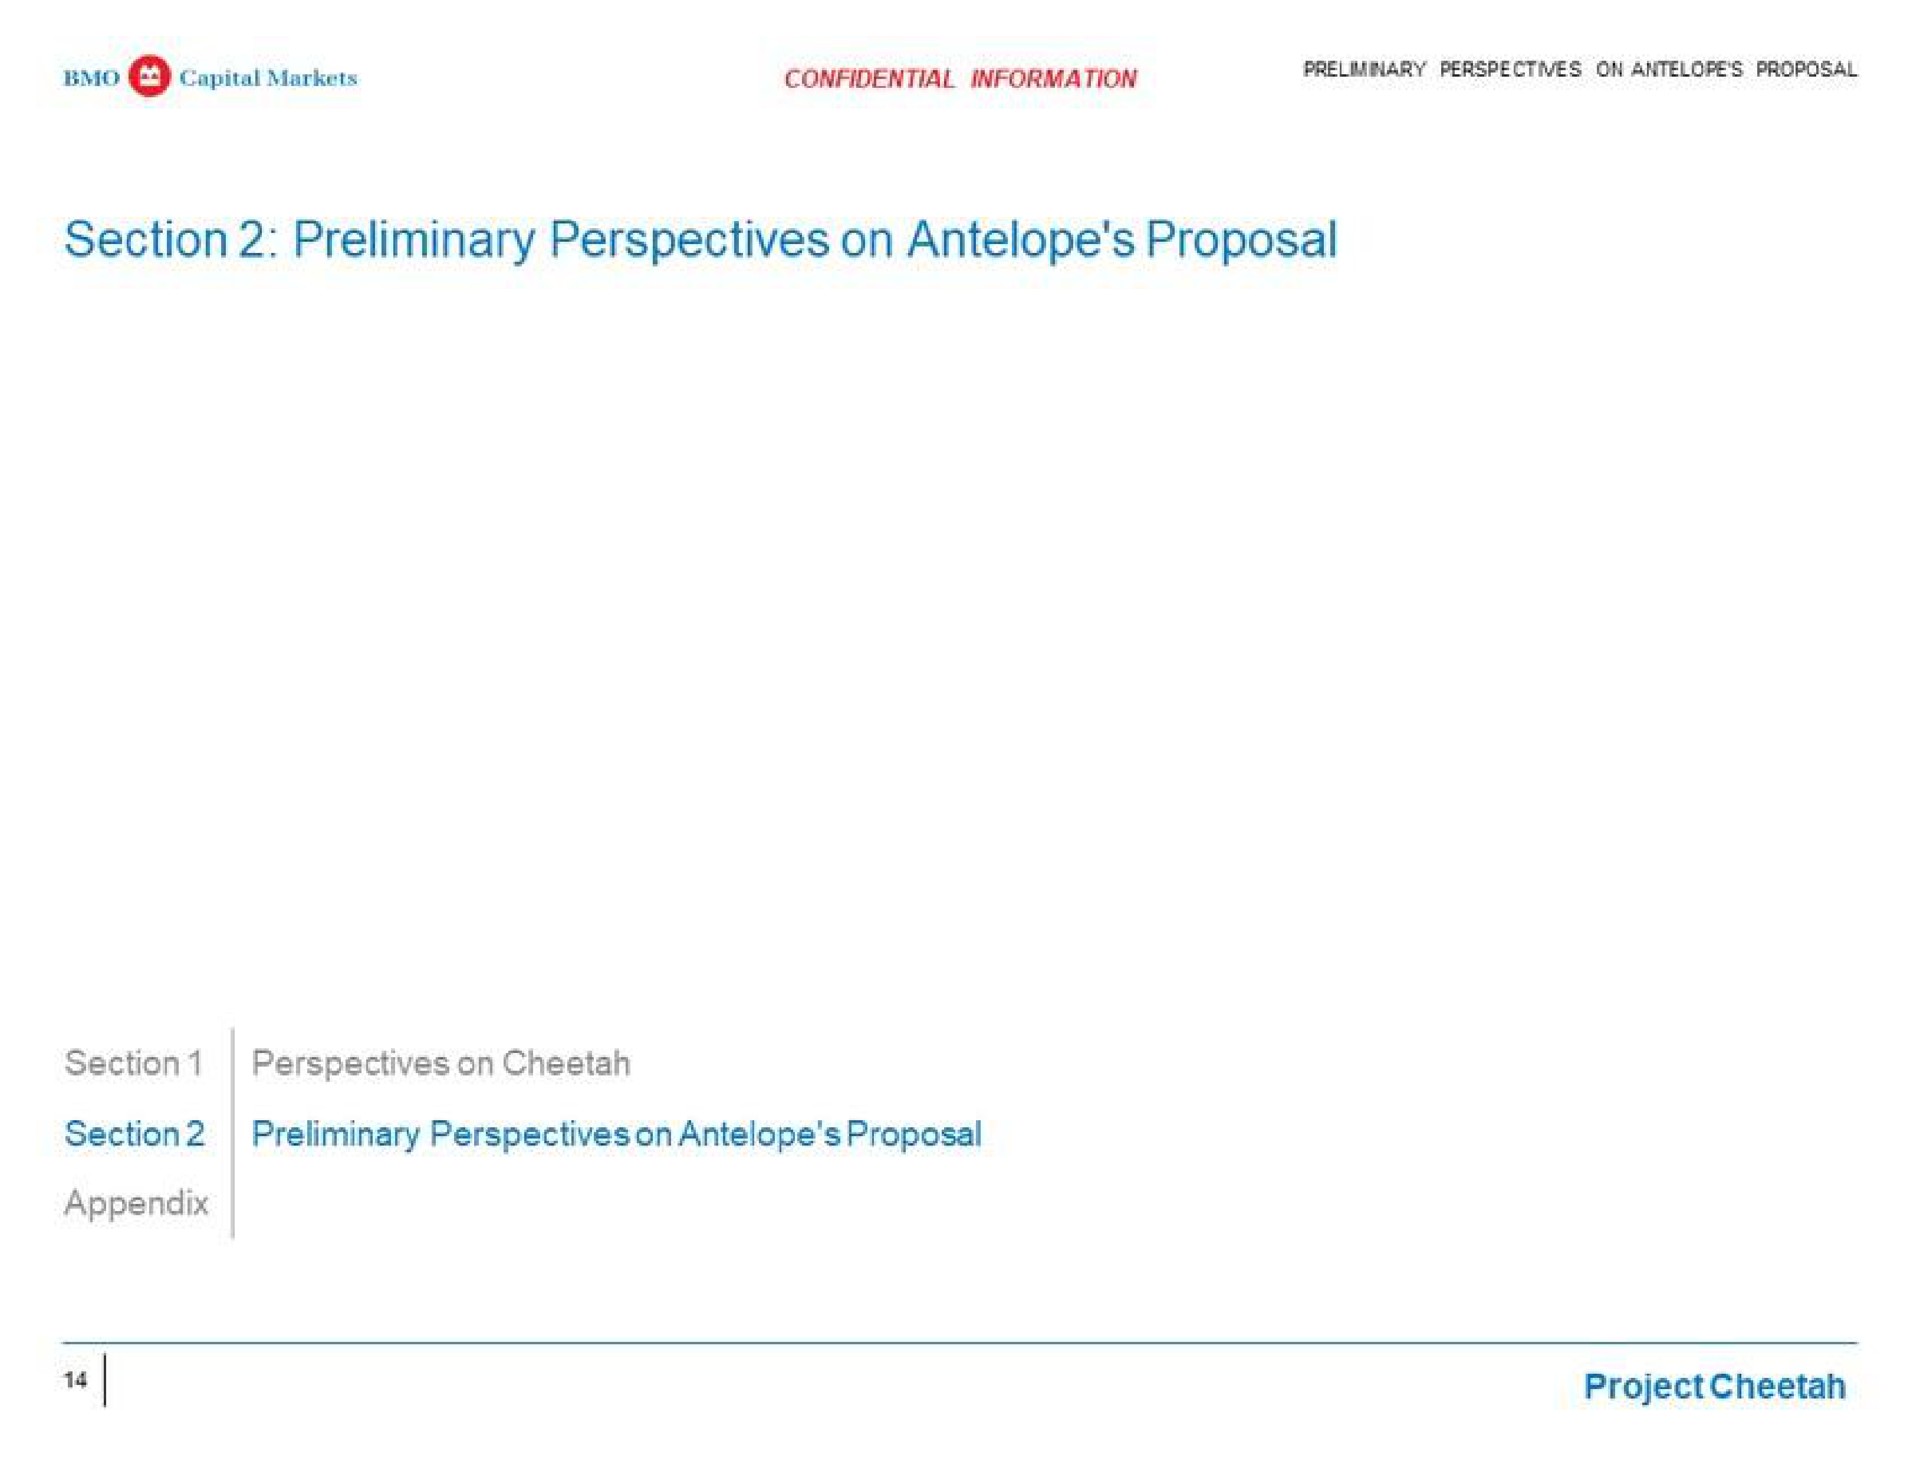 section preliminary perspectives on antelope proposal section preliminary perspectives on antelope proposal appendix project cheetah | BMO Capital Markets